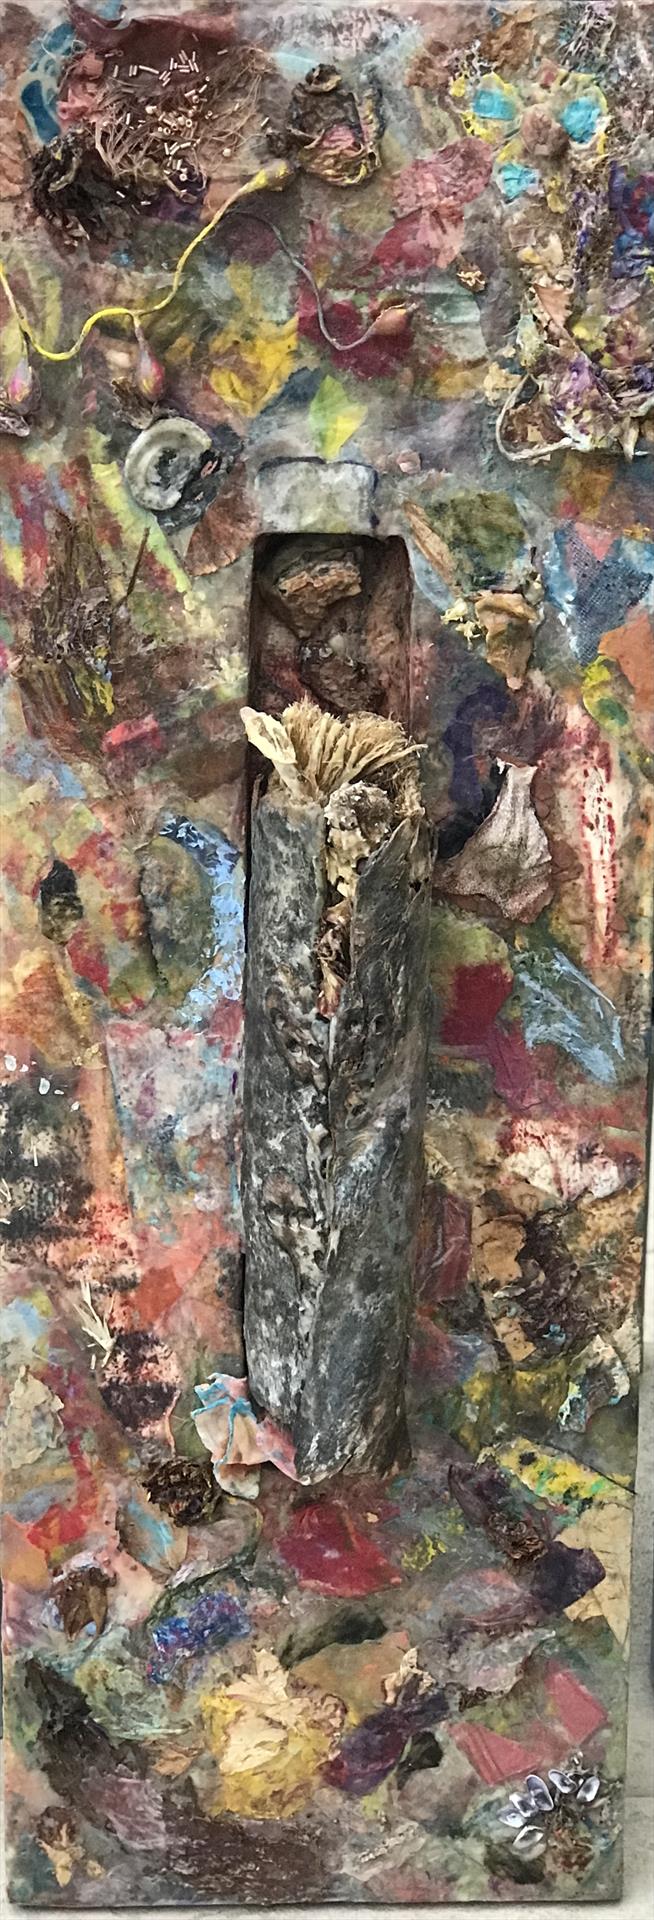 Carol Kay - Cherish the Possibilities 36x12 Encaustic painting and monotype, mixed media sculpture NFS